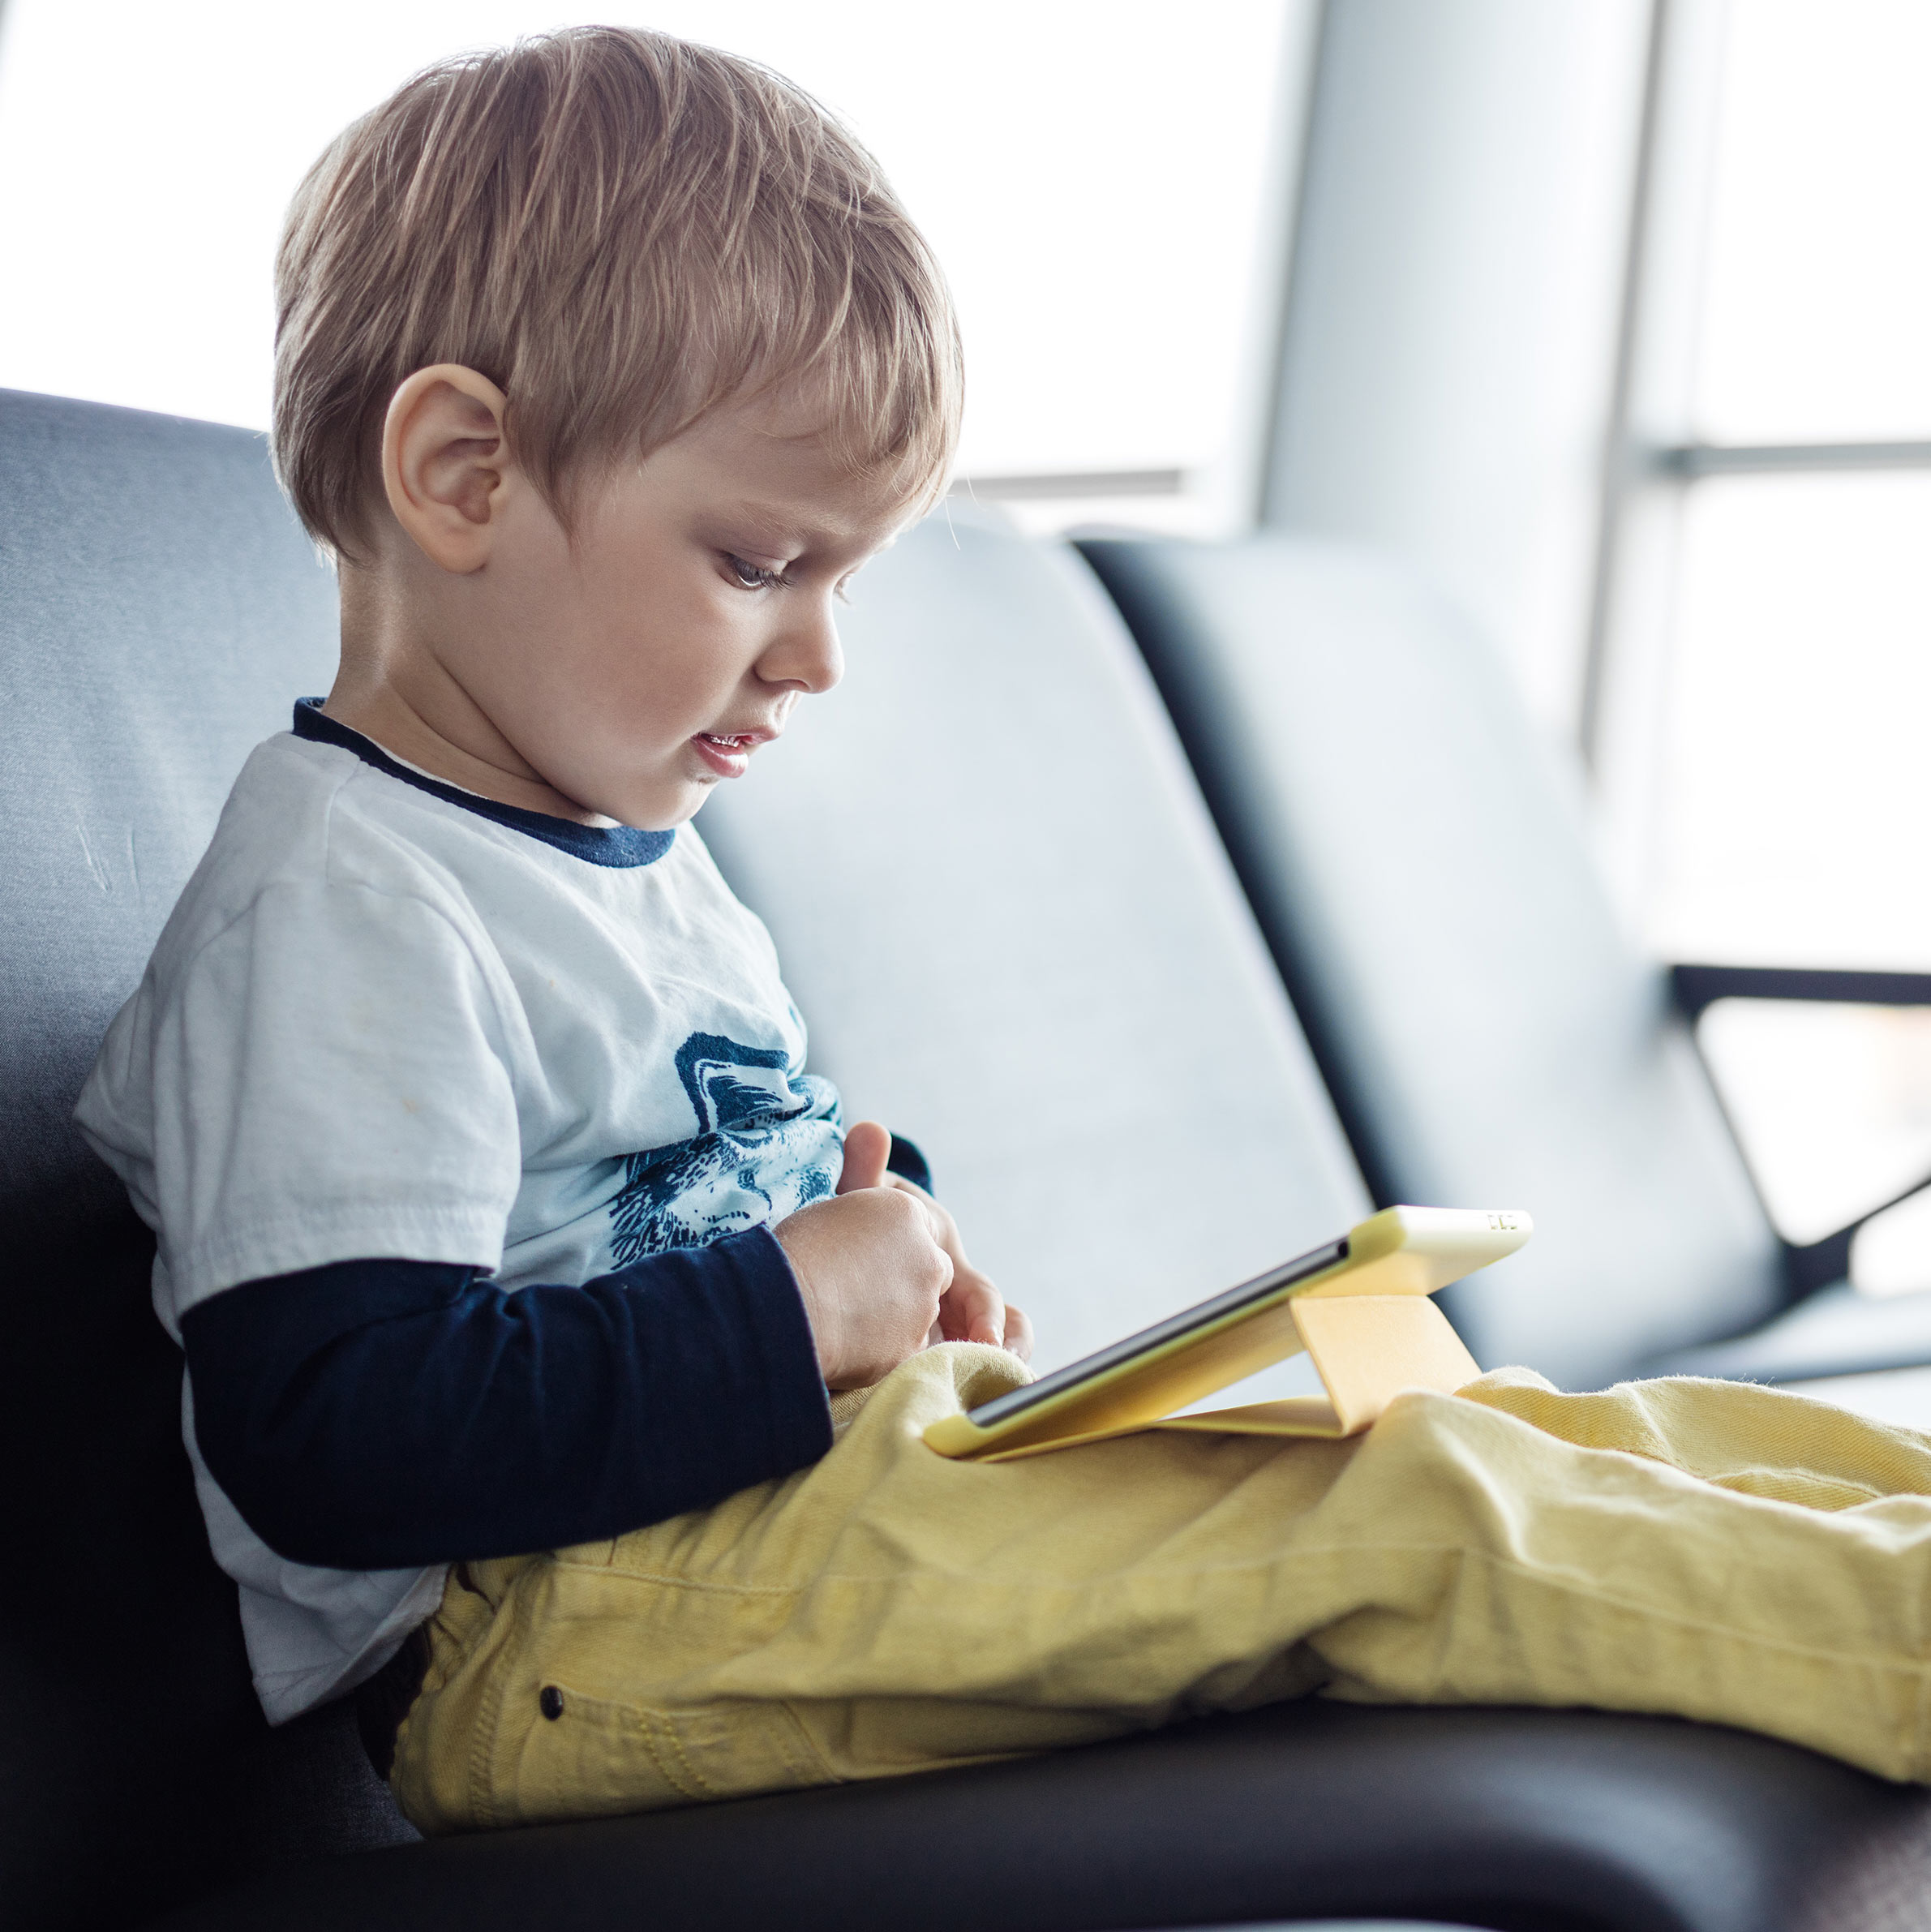 Little boy sitting in an airport departure hall and using his tablet